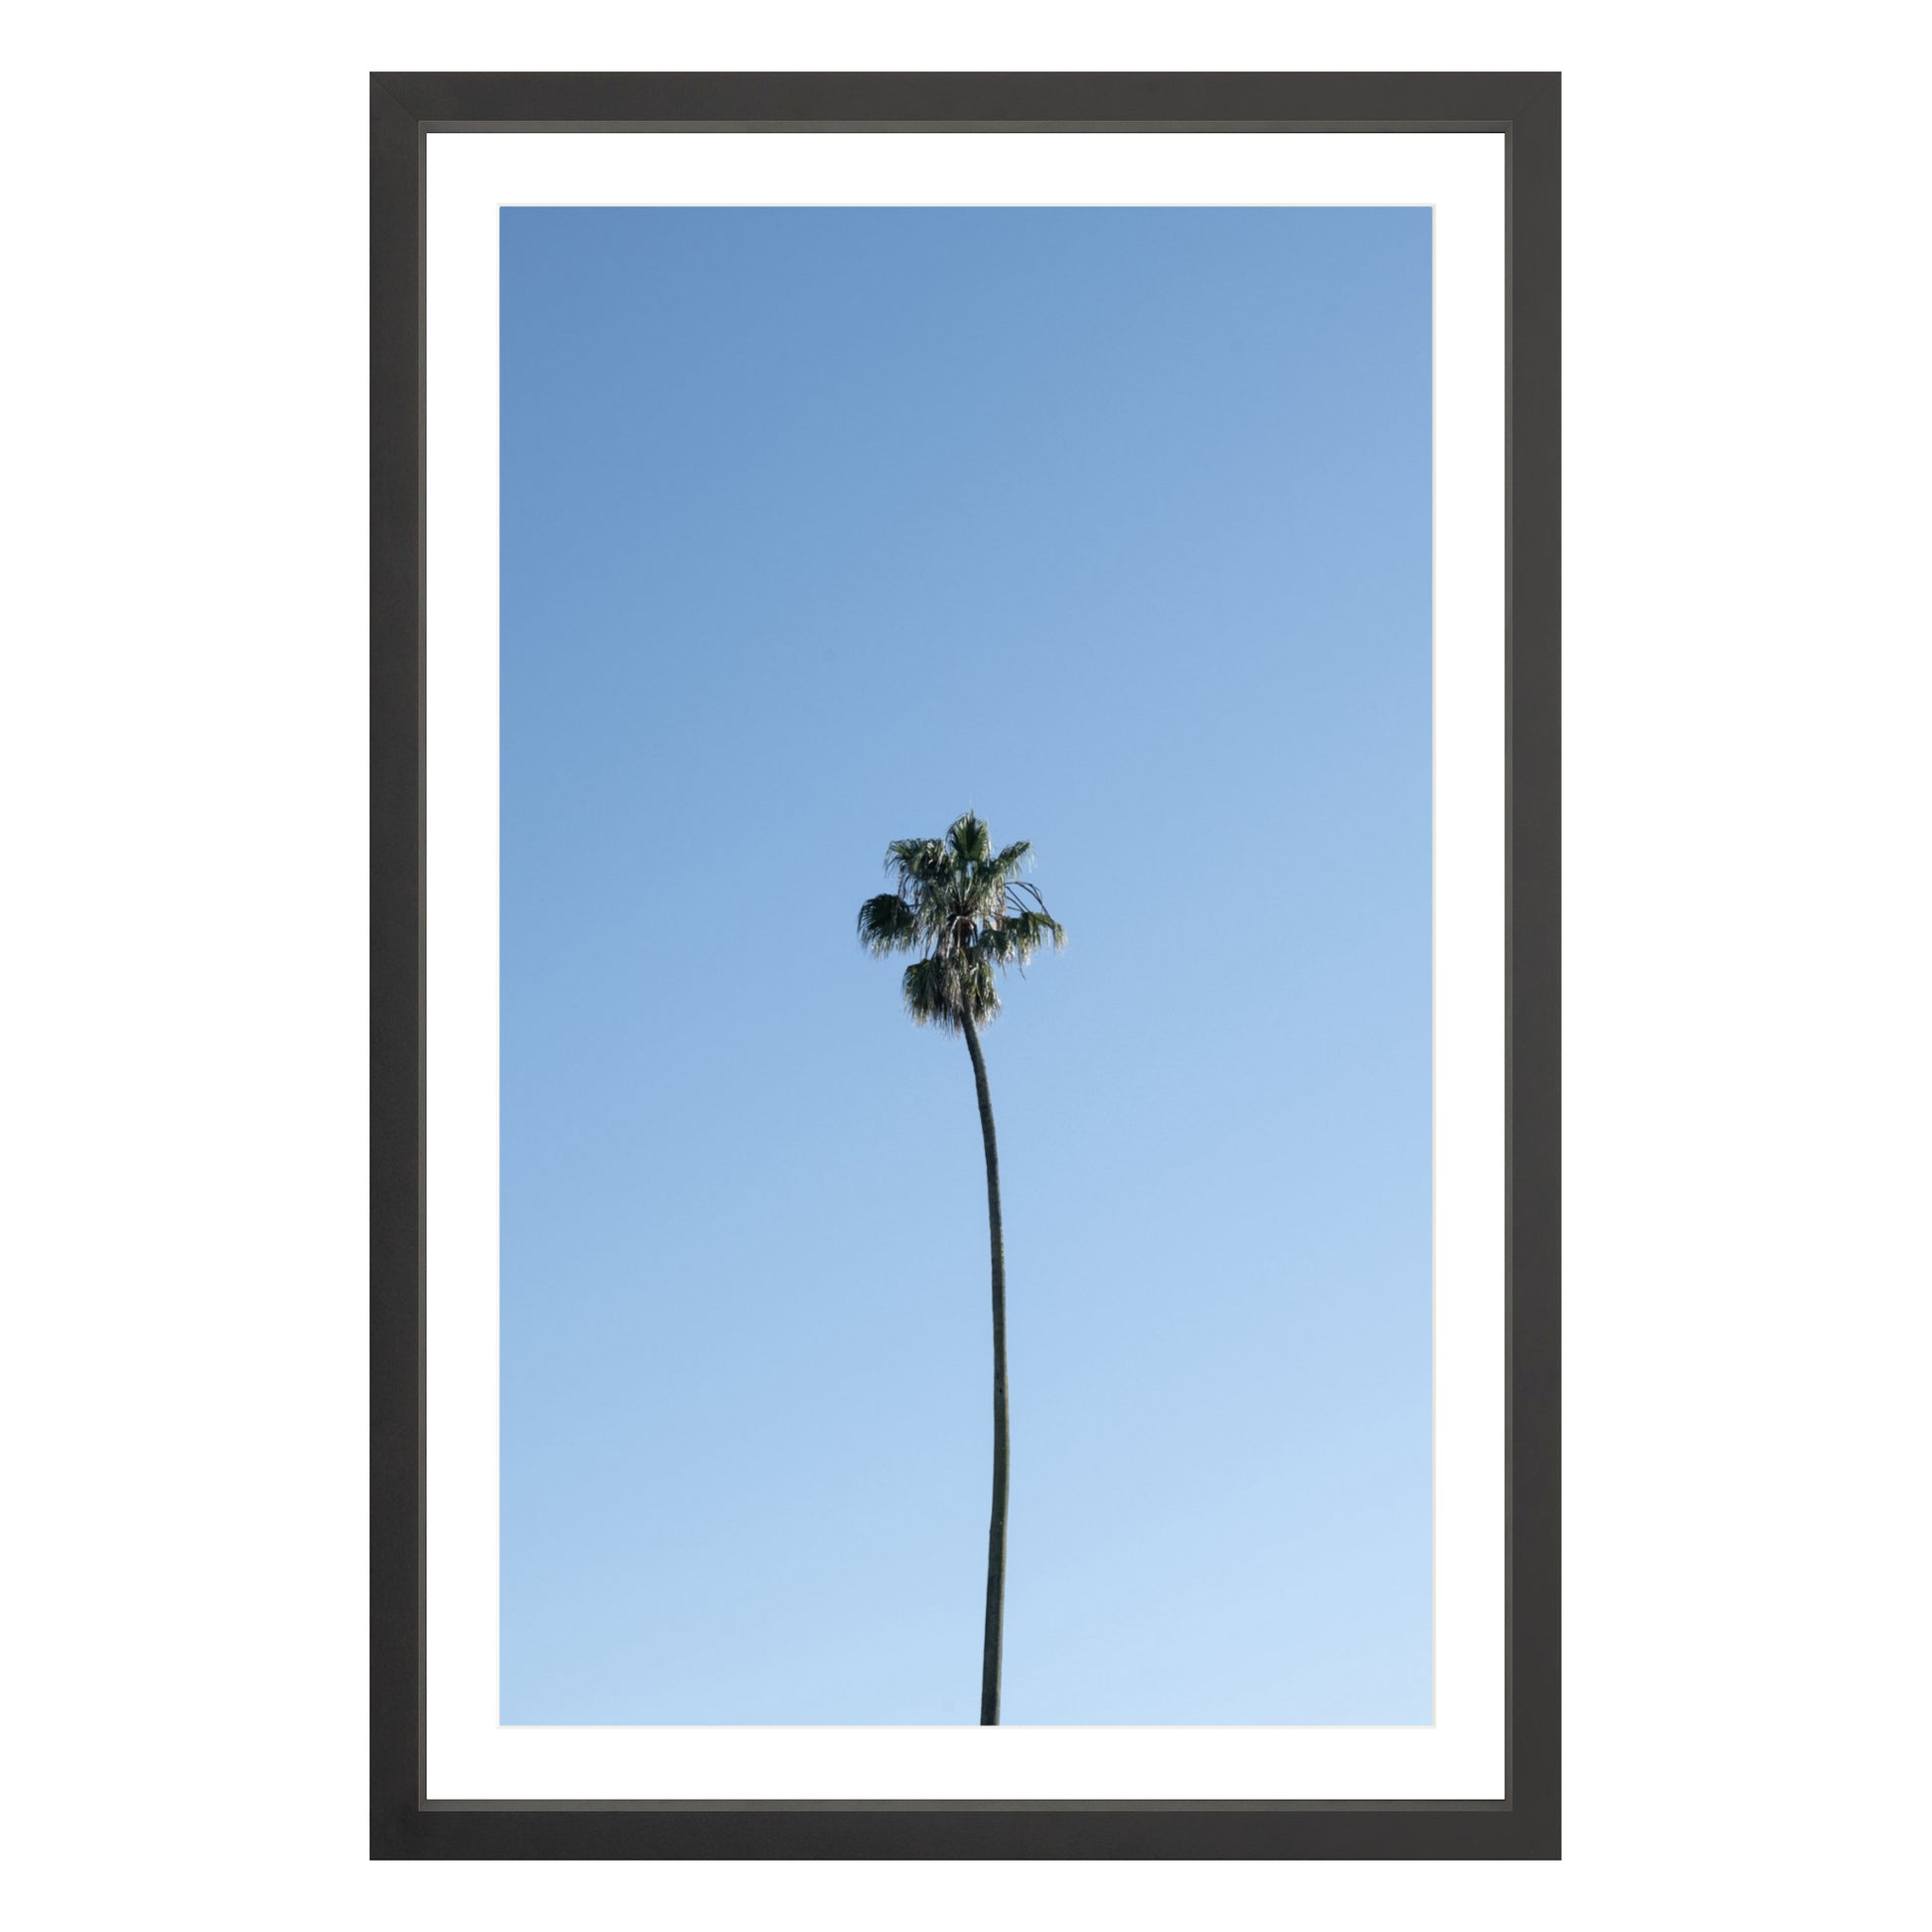 Photograph of single palm tree in front of blue sky in black frame with white mat